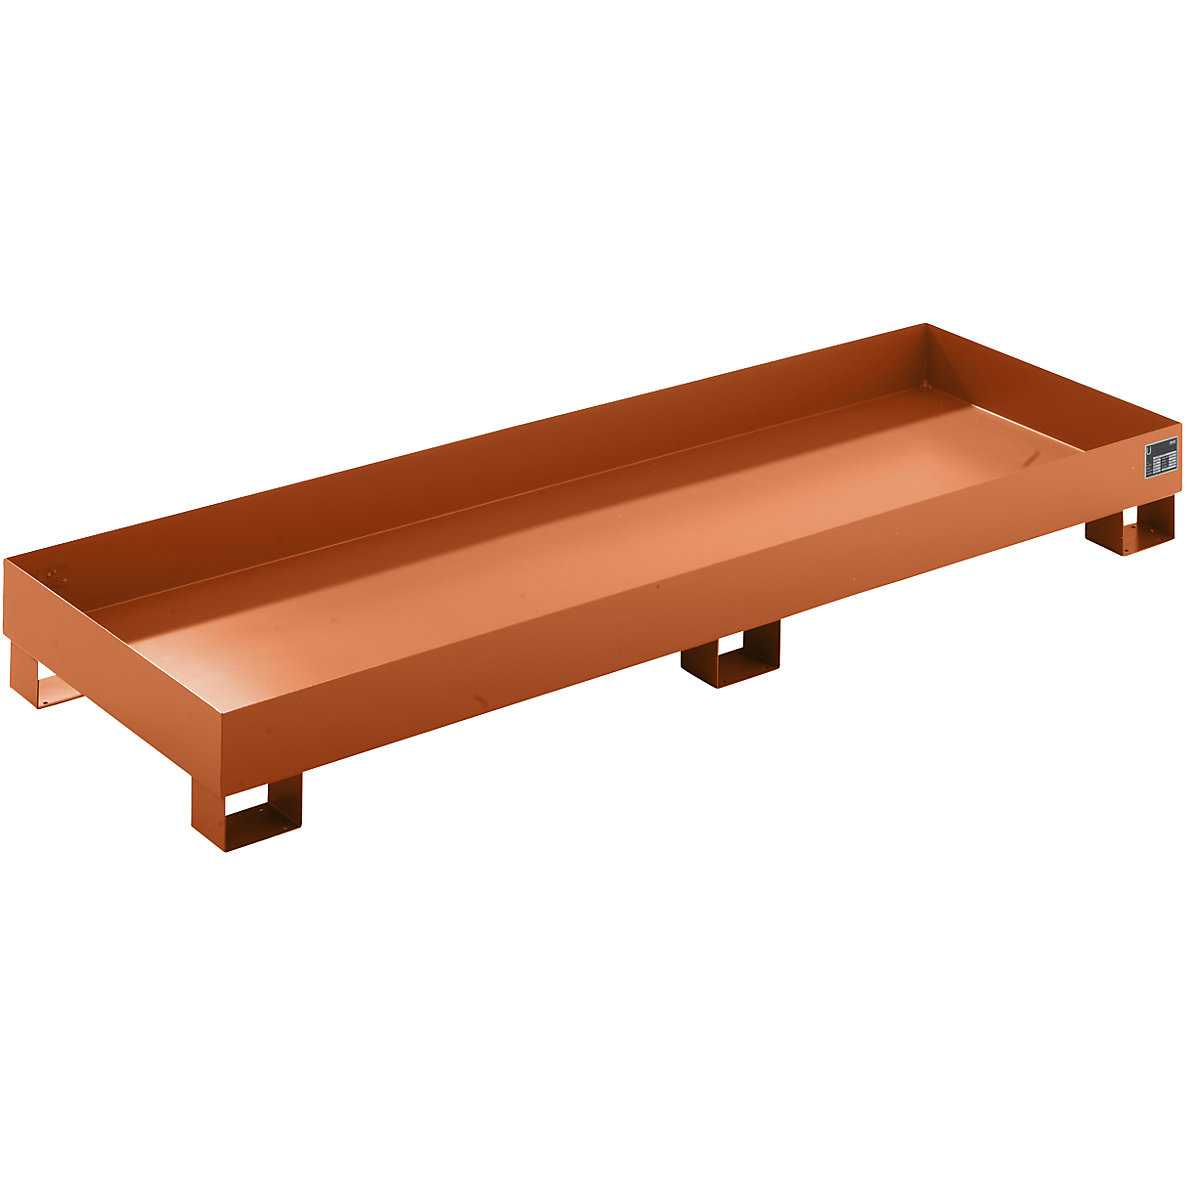 Sump tray made from sheet steel, LxWxH 2400 x 800 x 250 mm, orange RAL 2000-8